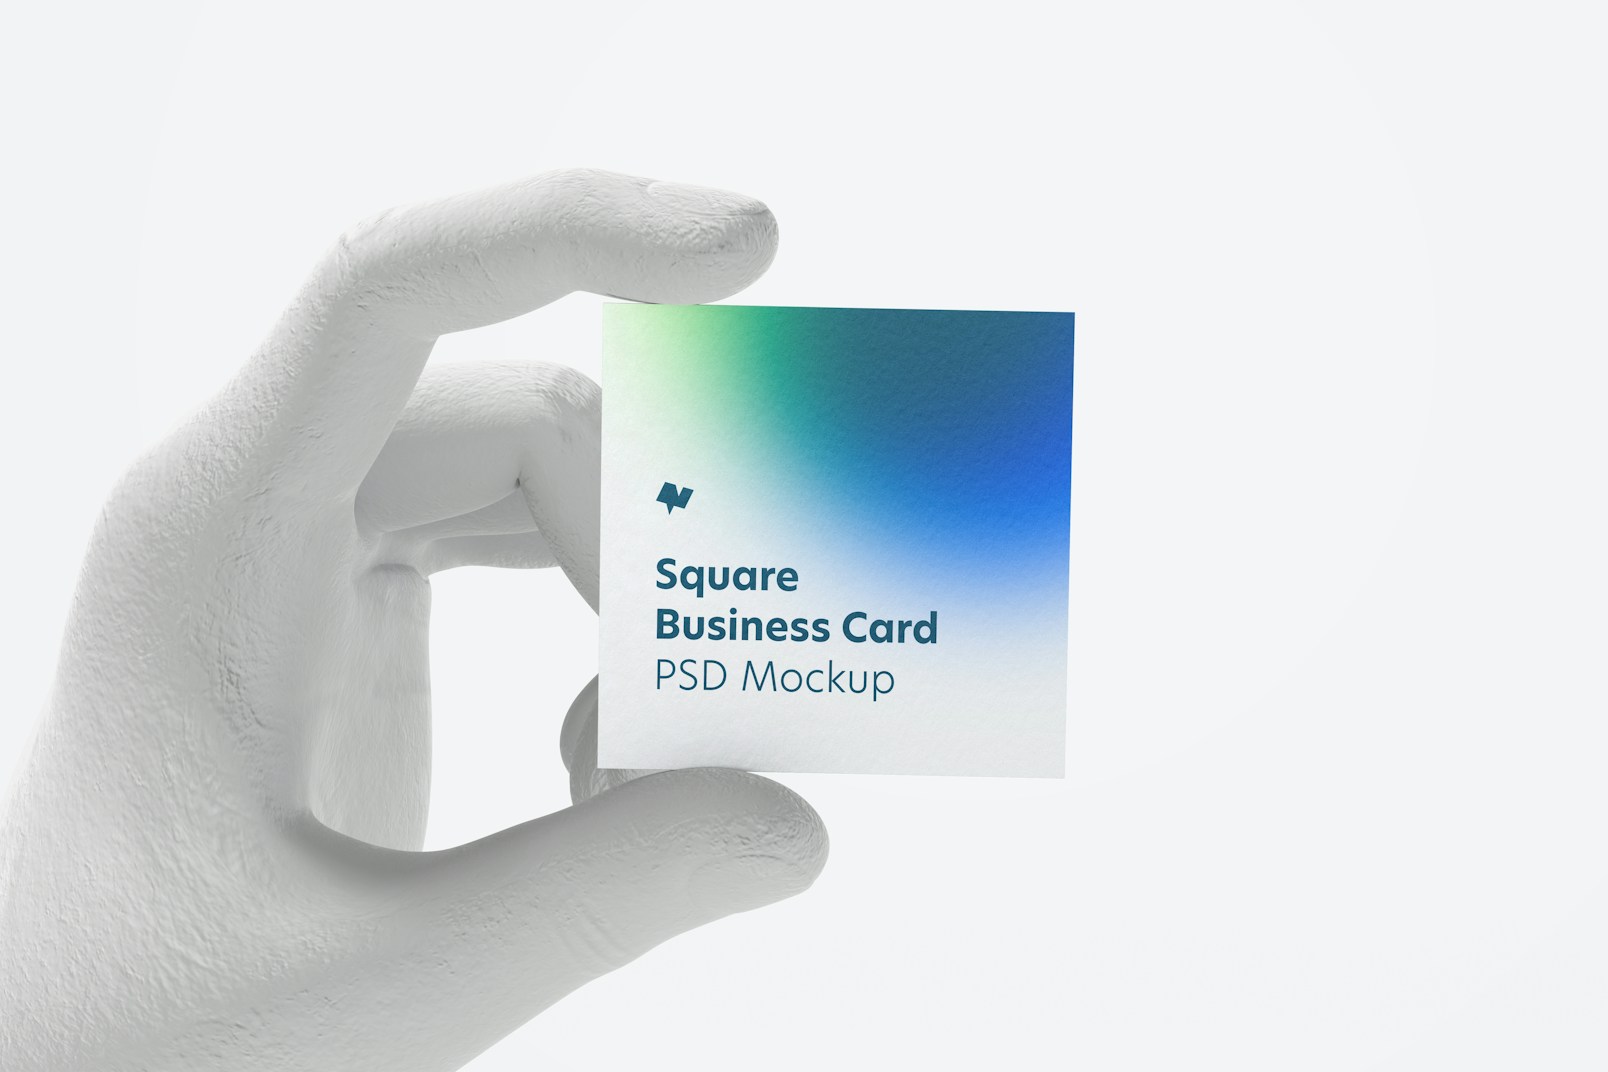 Square Business Card with Hand Mockup